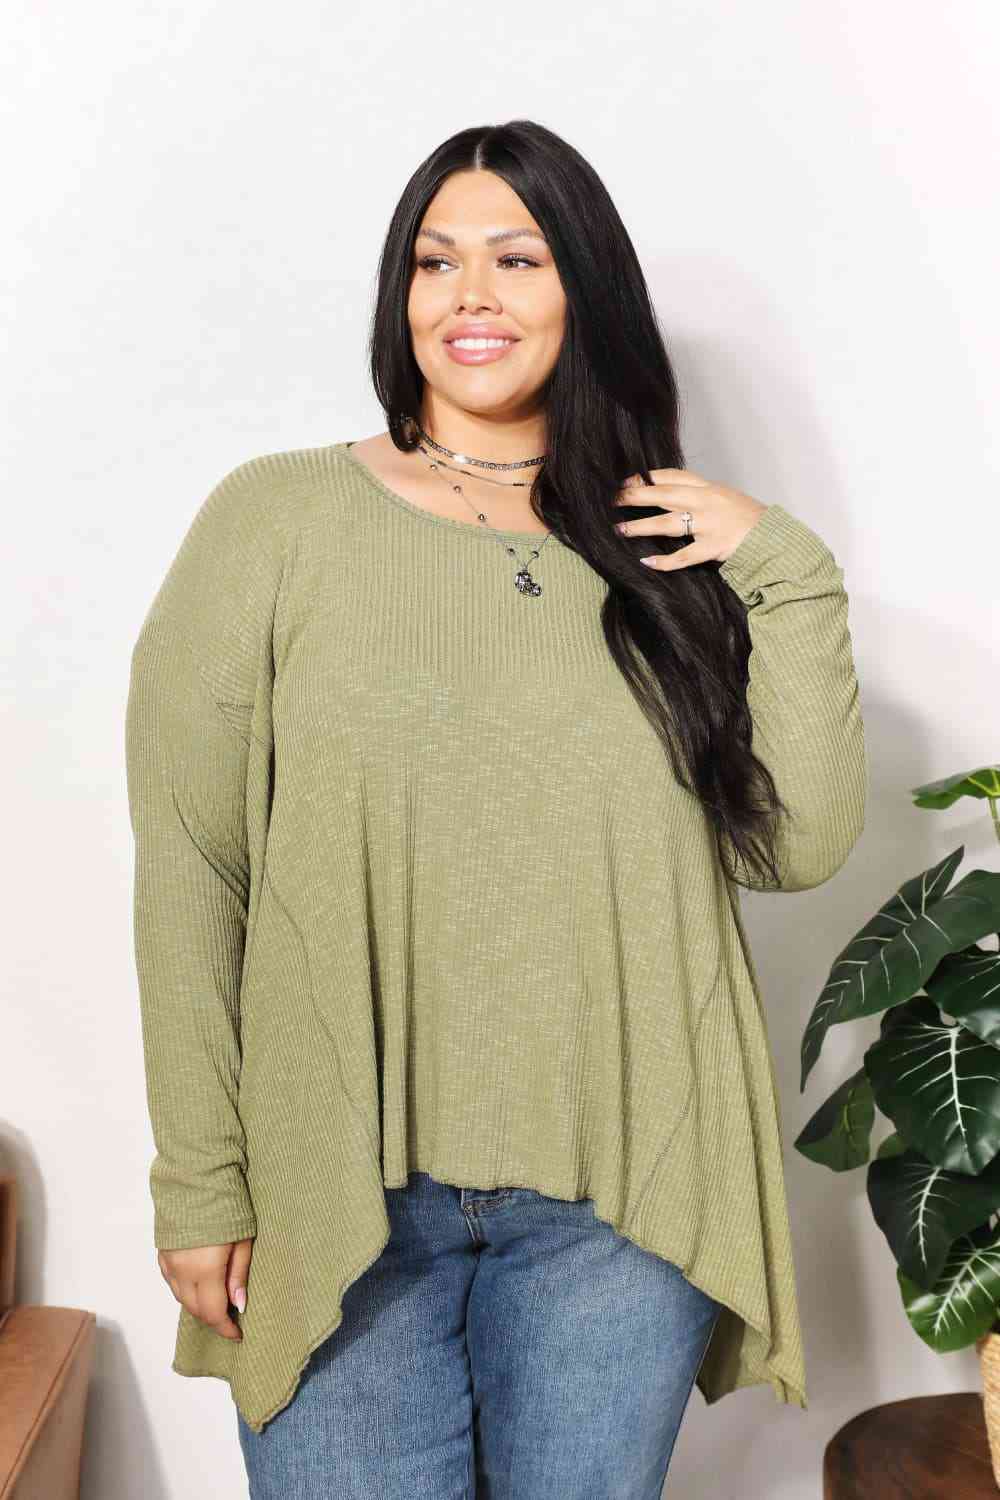 HEYSON Tops Mist Green / S Full Size Oversized Super Soft Rib Layering Top with a Sharkbite Hem and Round Neck